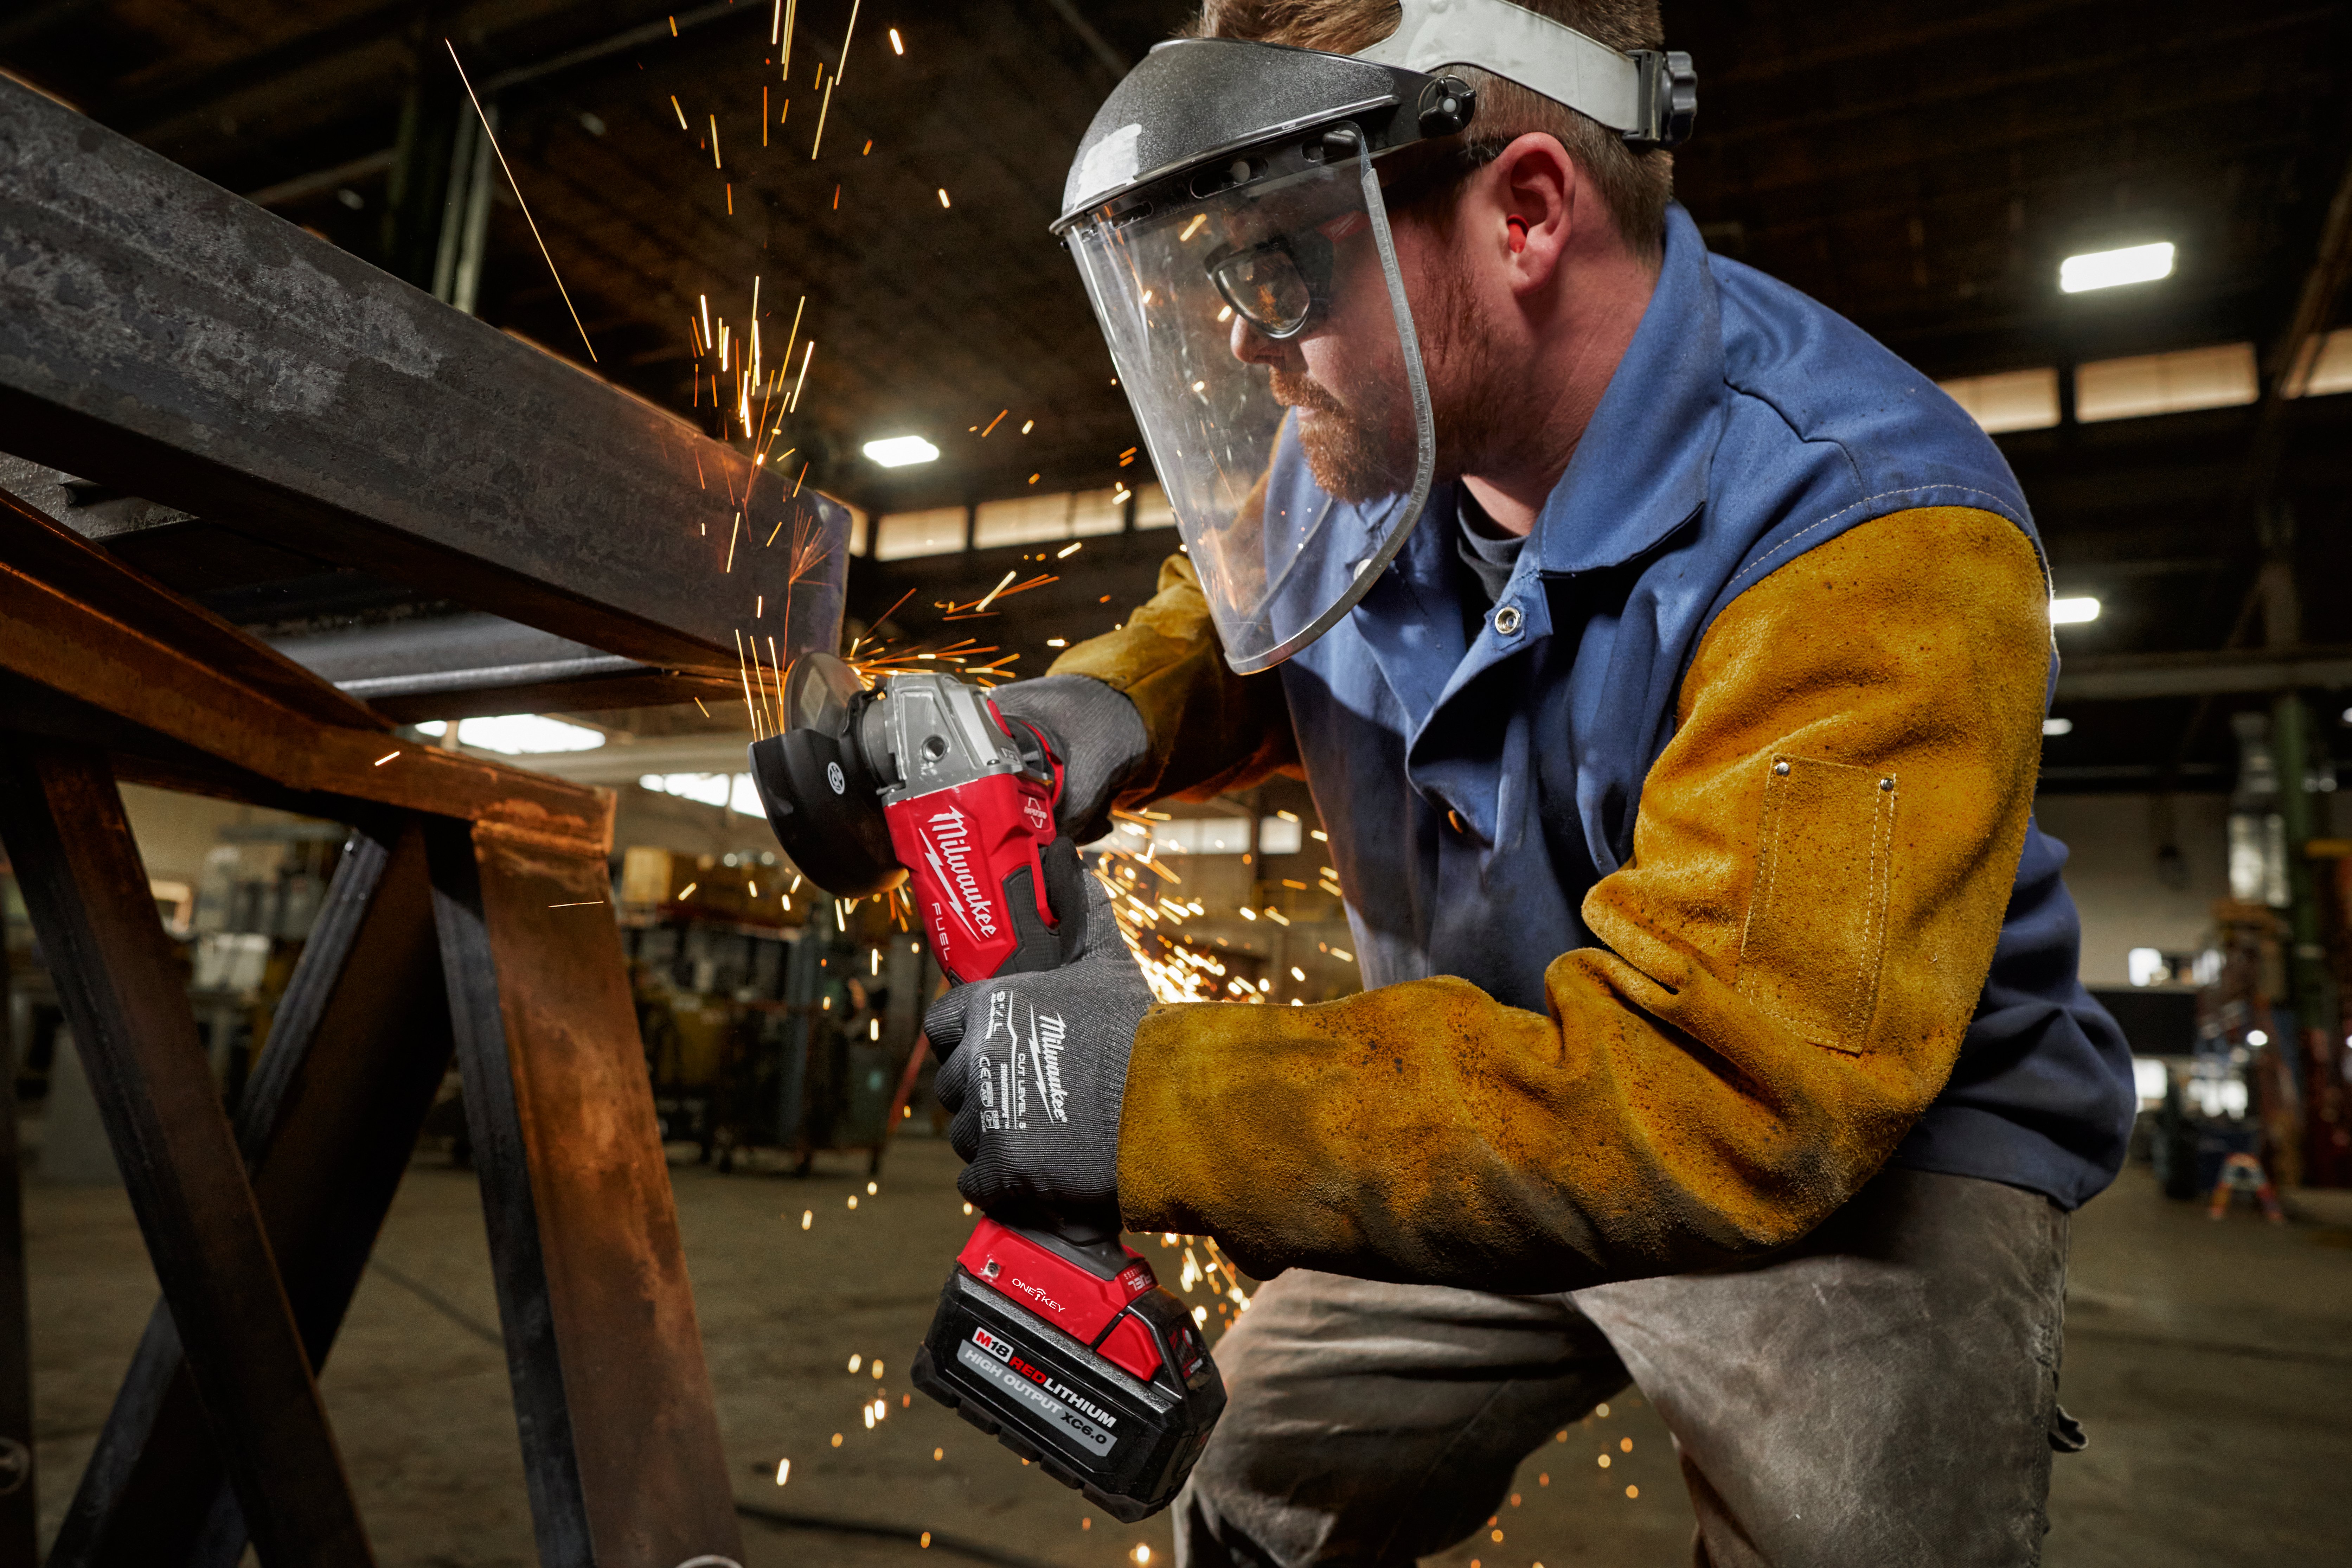 A metalworker utilizes a Milwaukee grinder that is compatible with the One-Key app